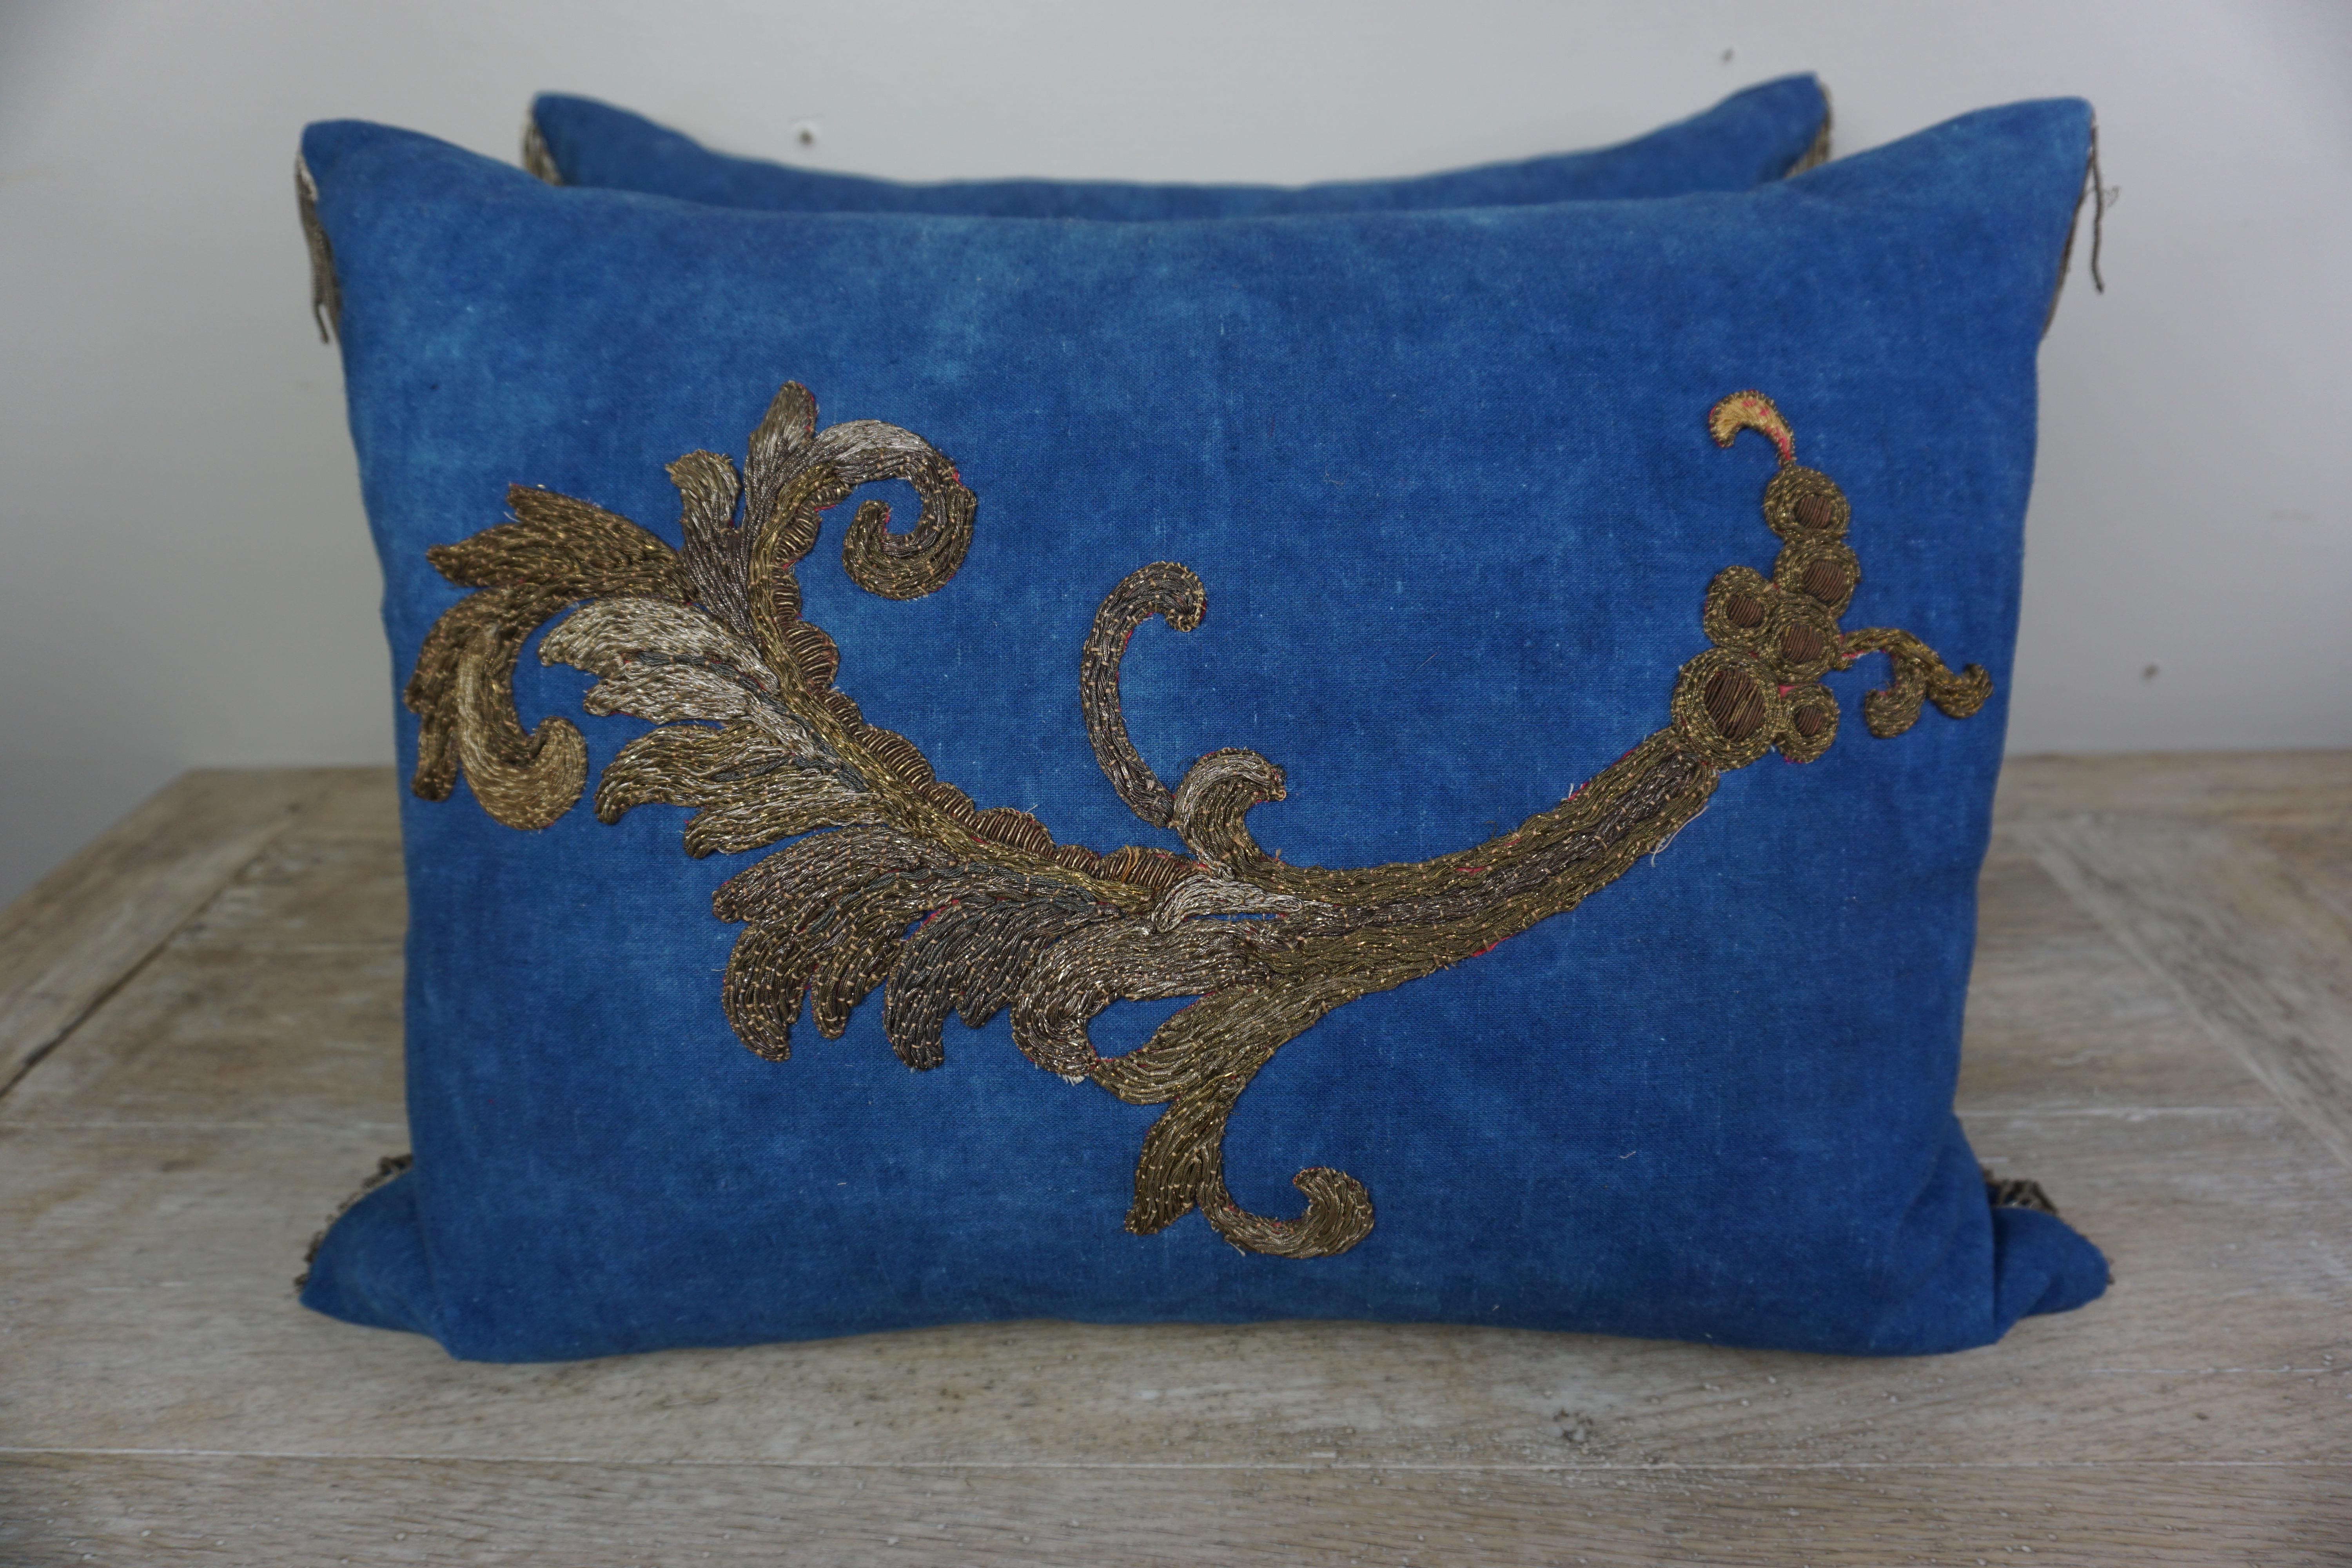 Pair of custom pillows by Melissa Levinson. 19th century gold and silver metallic appliques on blue linen fronts with blue linen backs. 19th century metallic trim at sides of pillows. Down inserts, sewn closed.